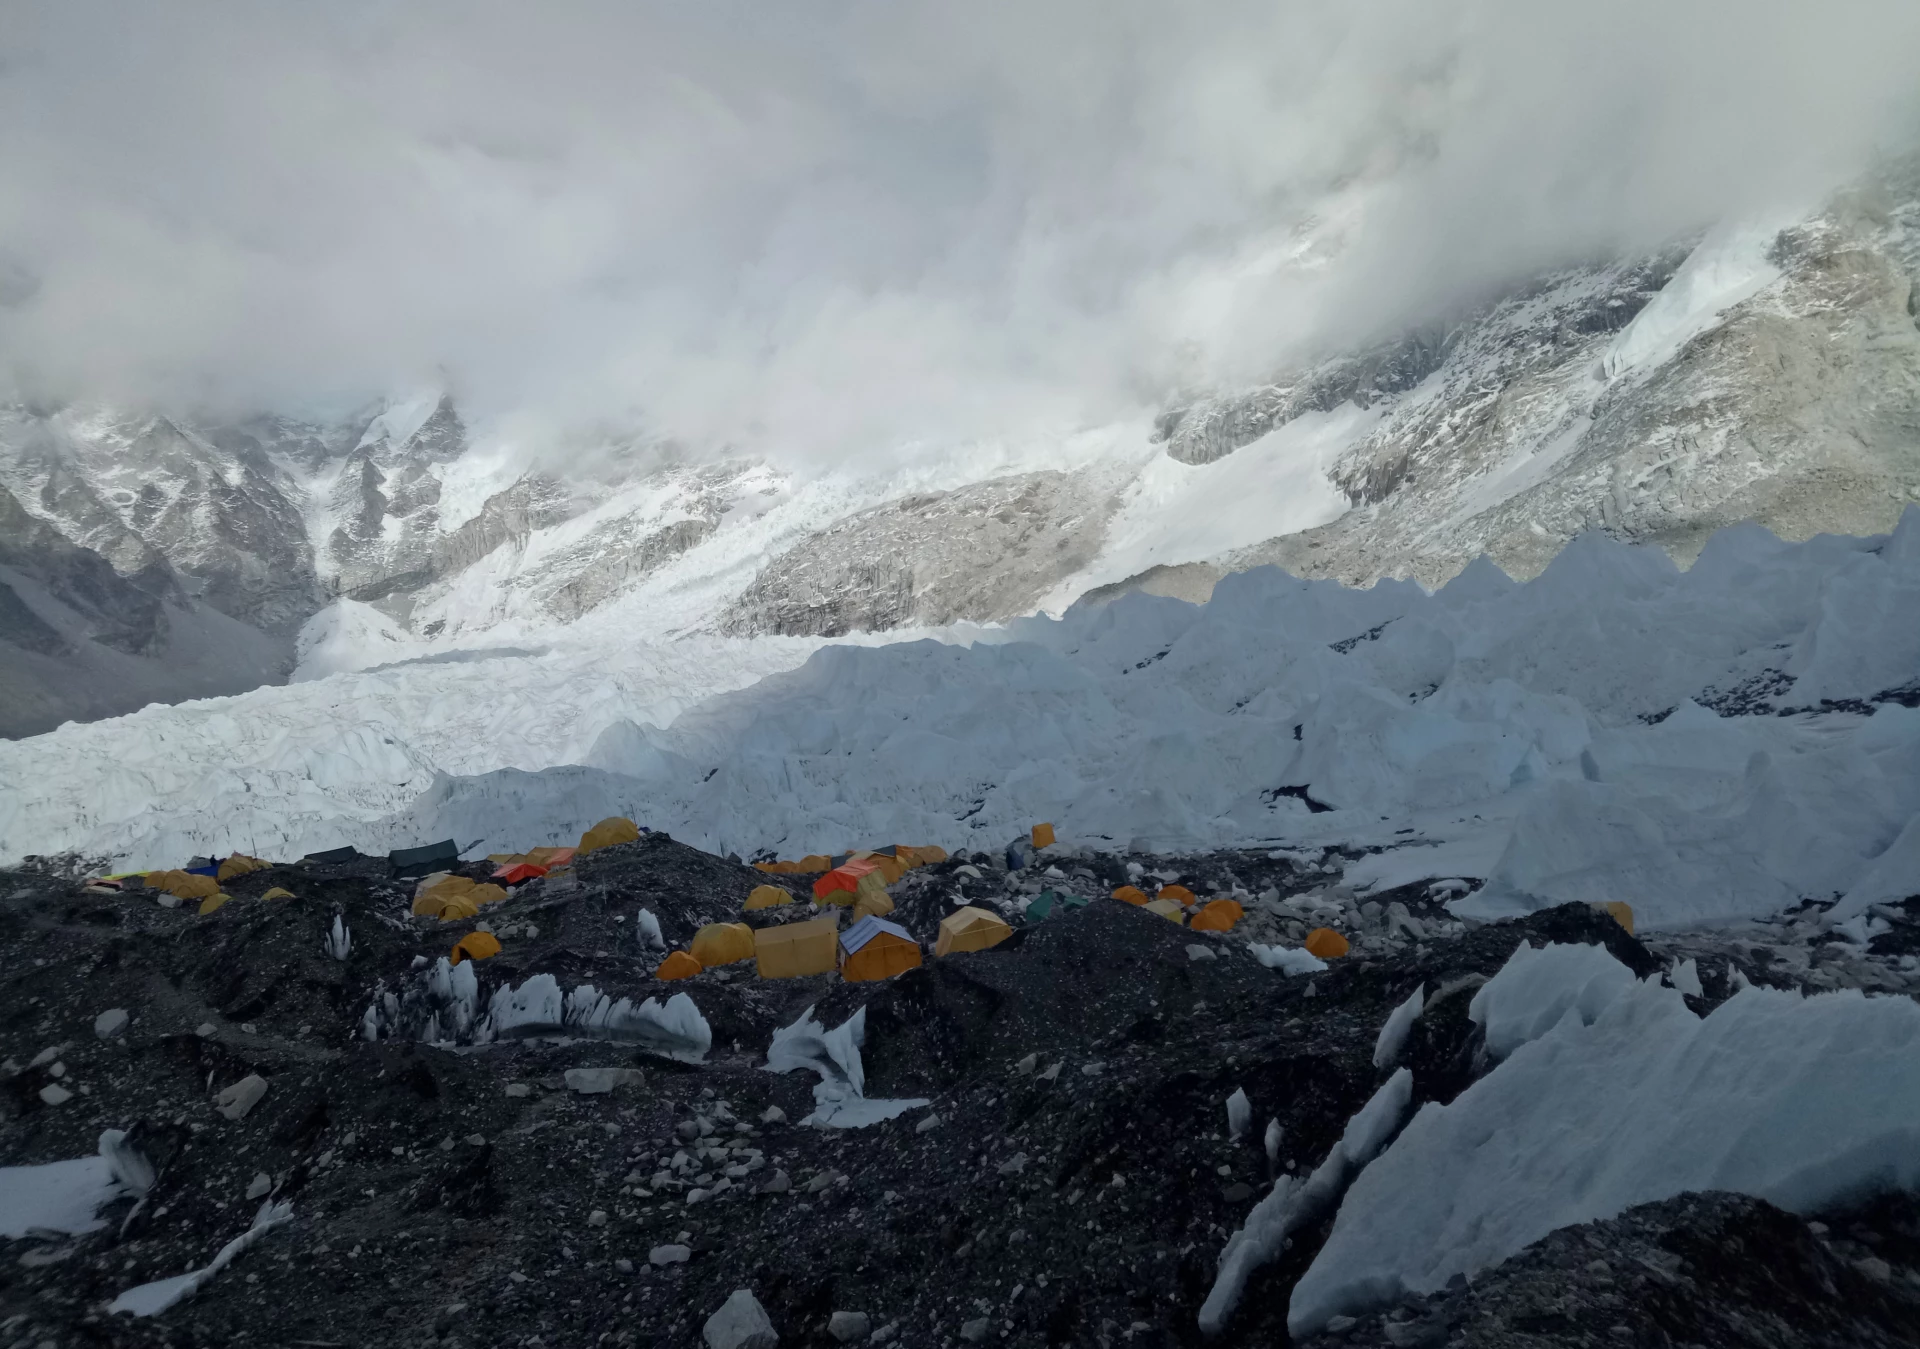  Expedition Camp at Everest Base Camp 